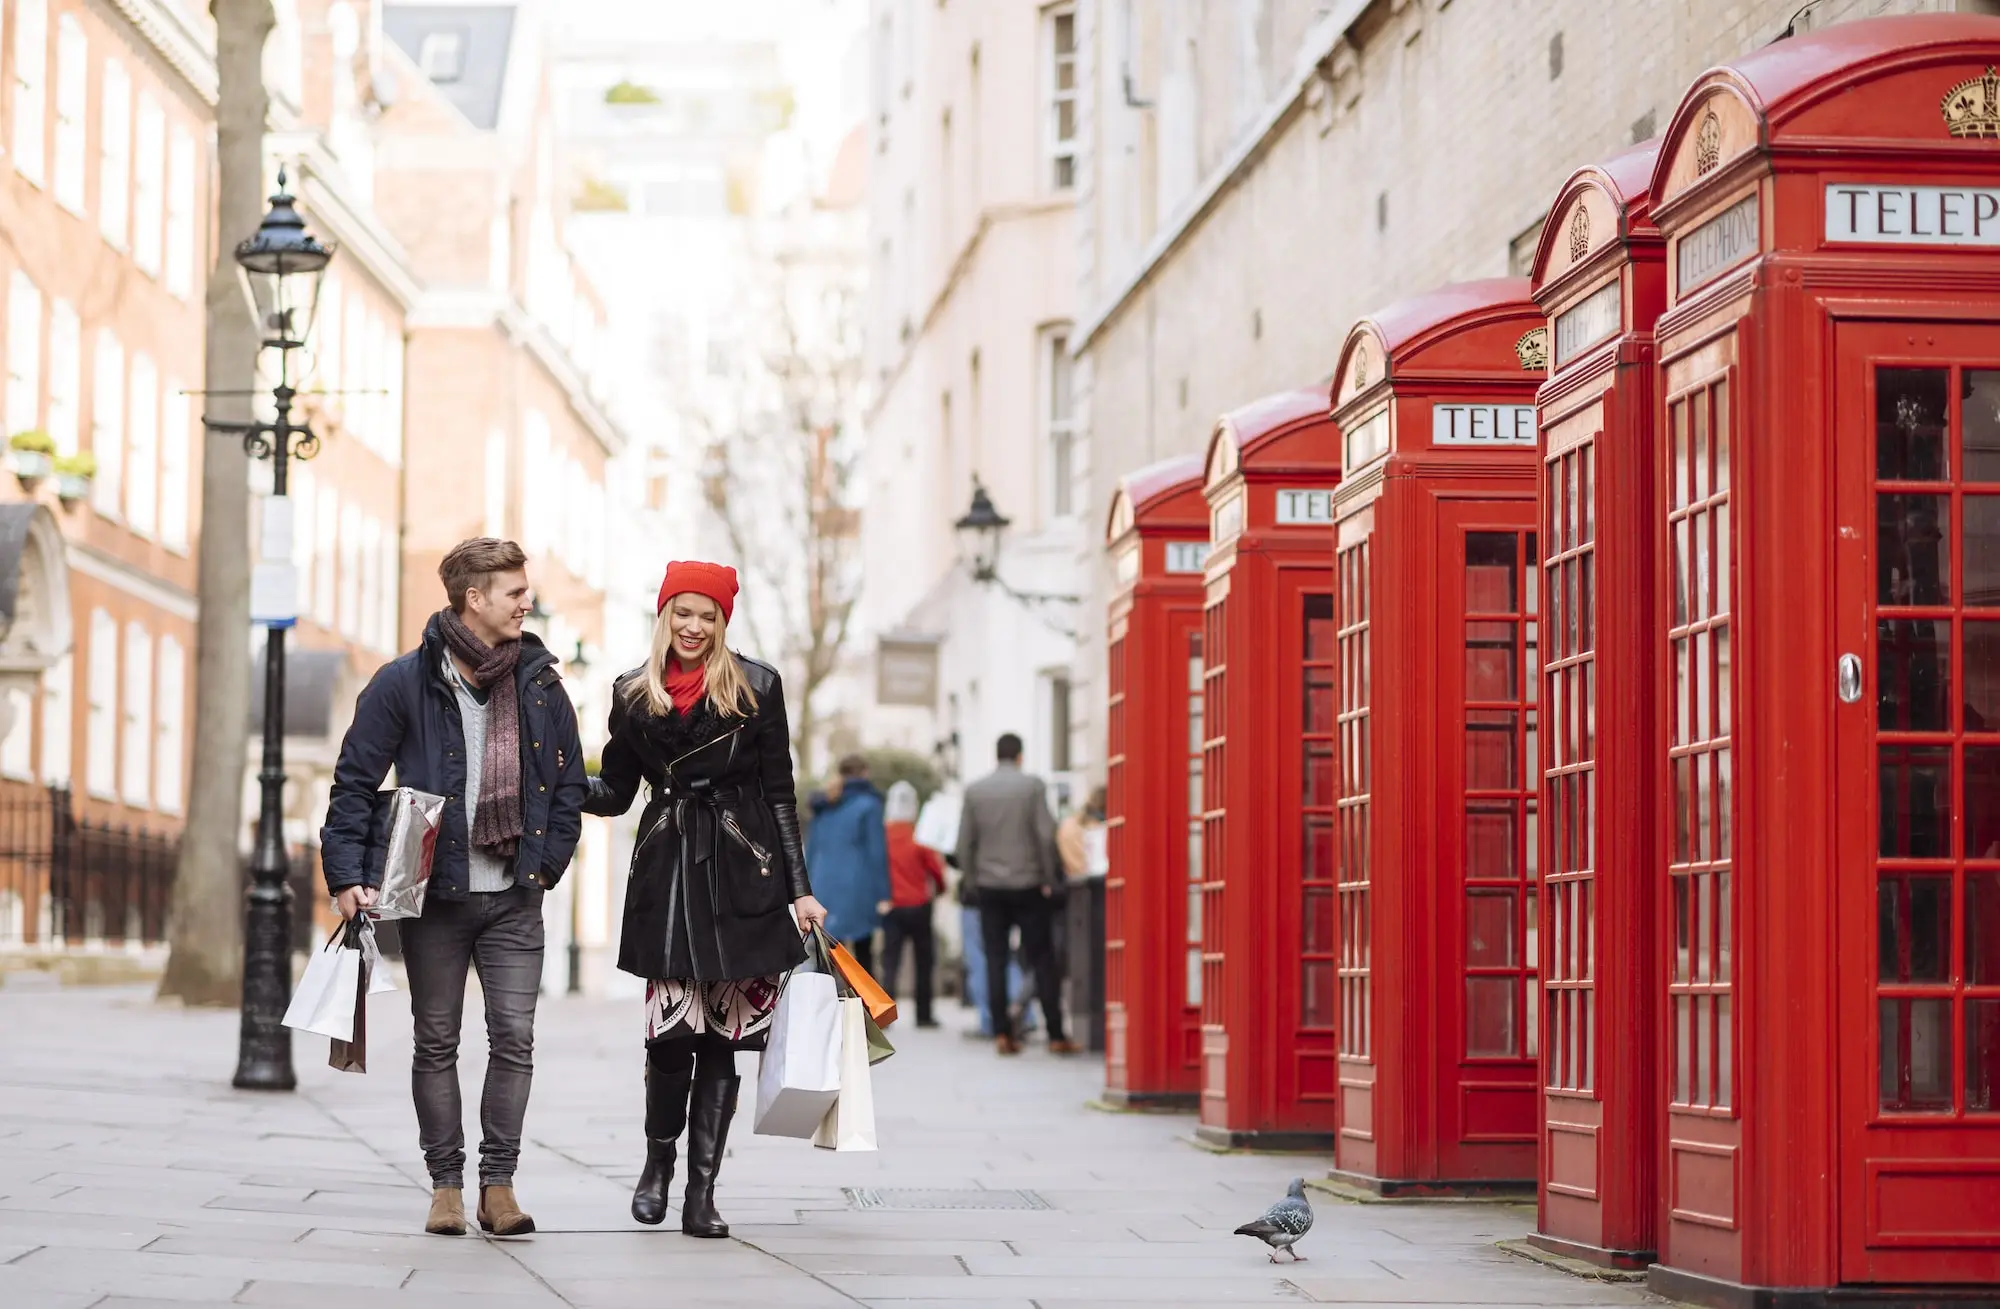 Photograph of man and woman walking arm in arm by several red phone booths in London.